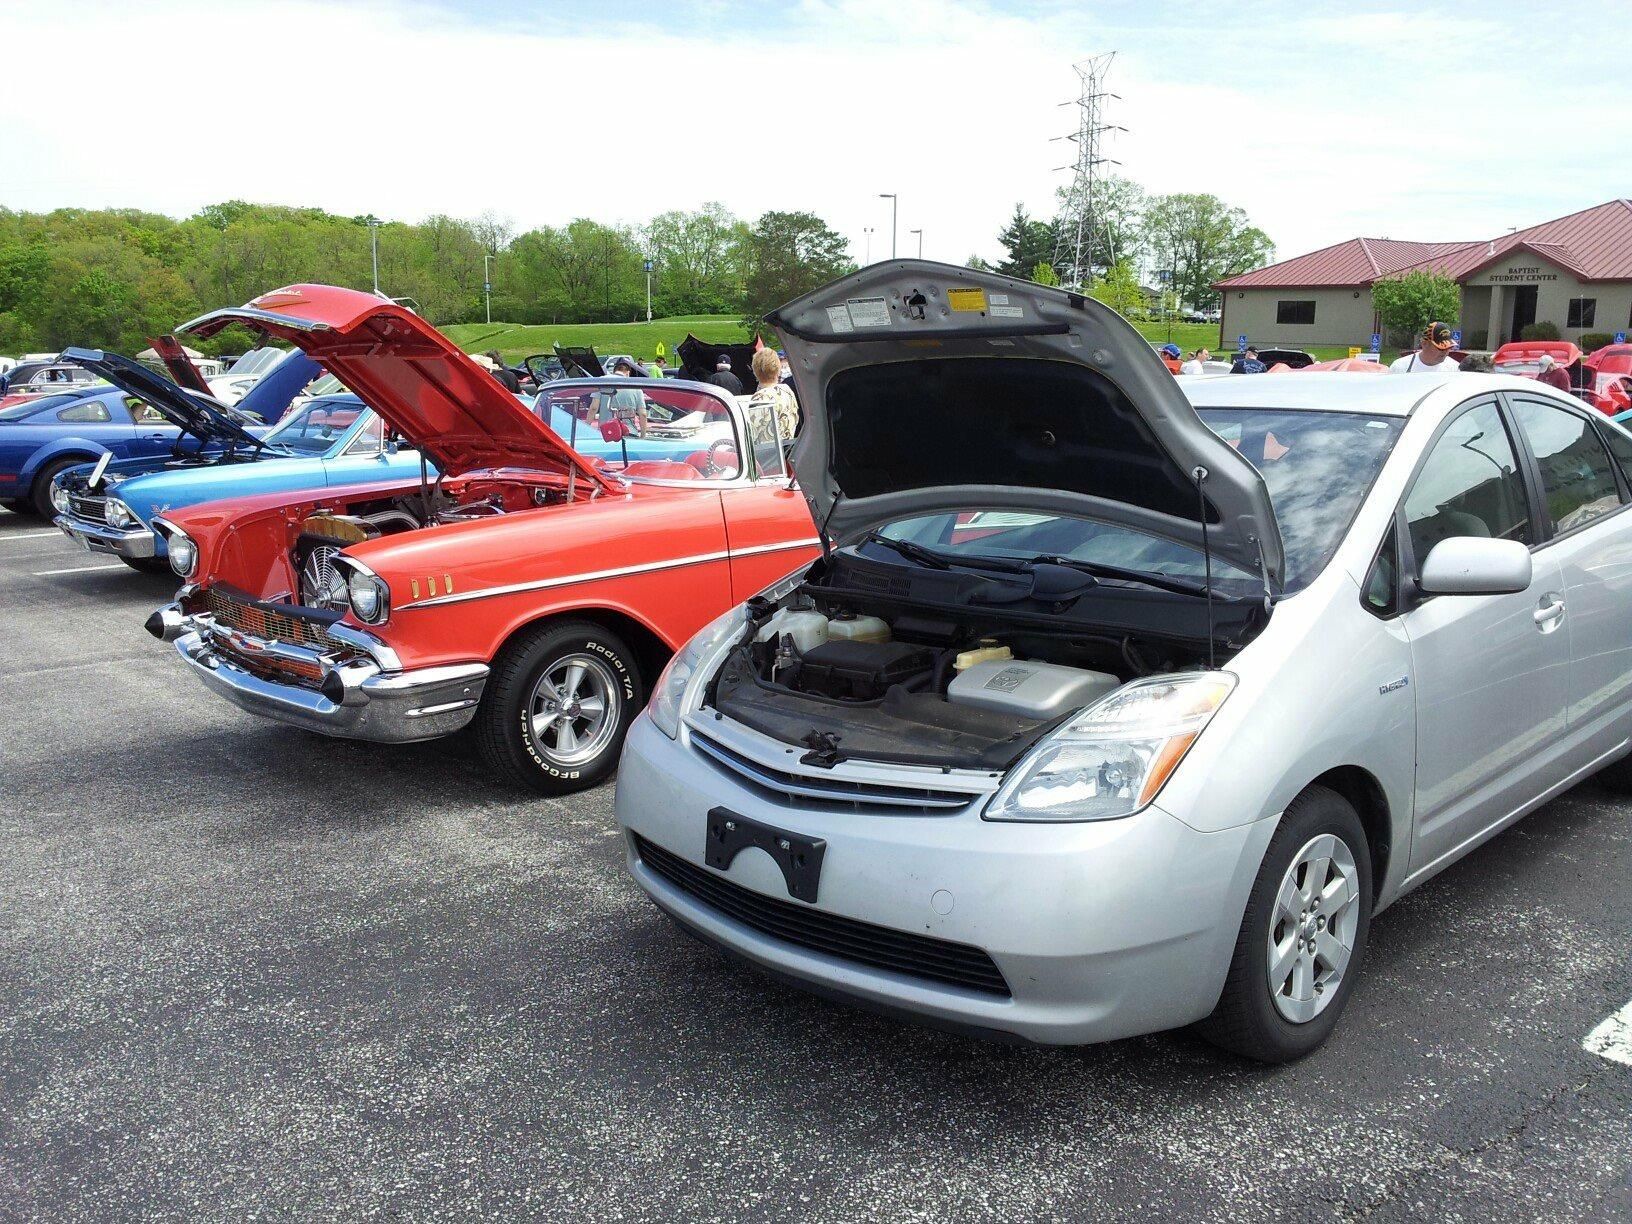 One time I entered my 2006 Prius into a classic car show